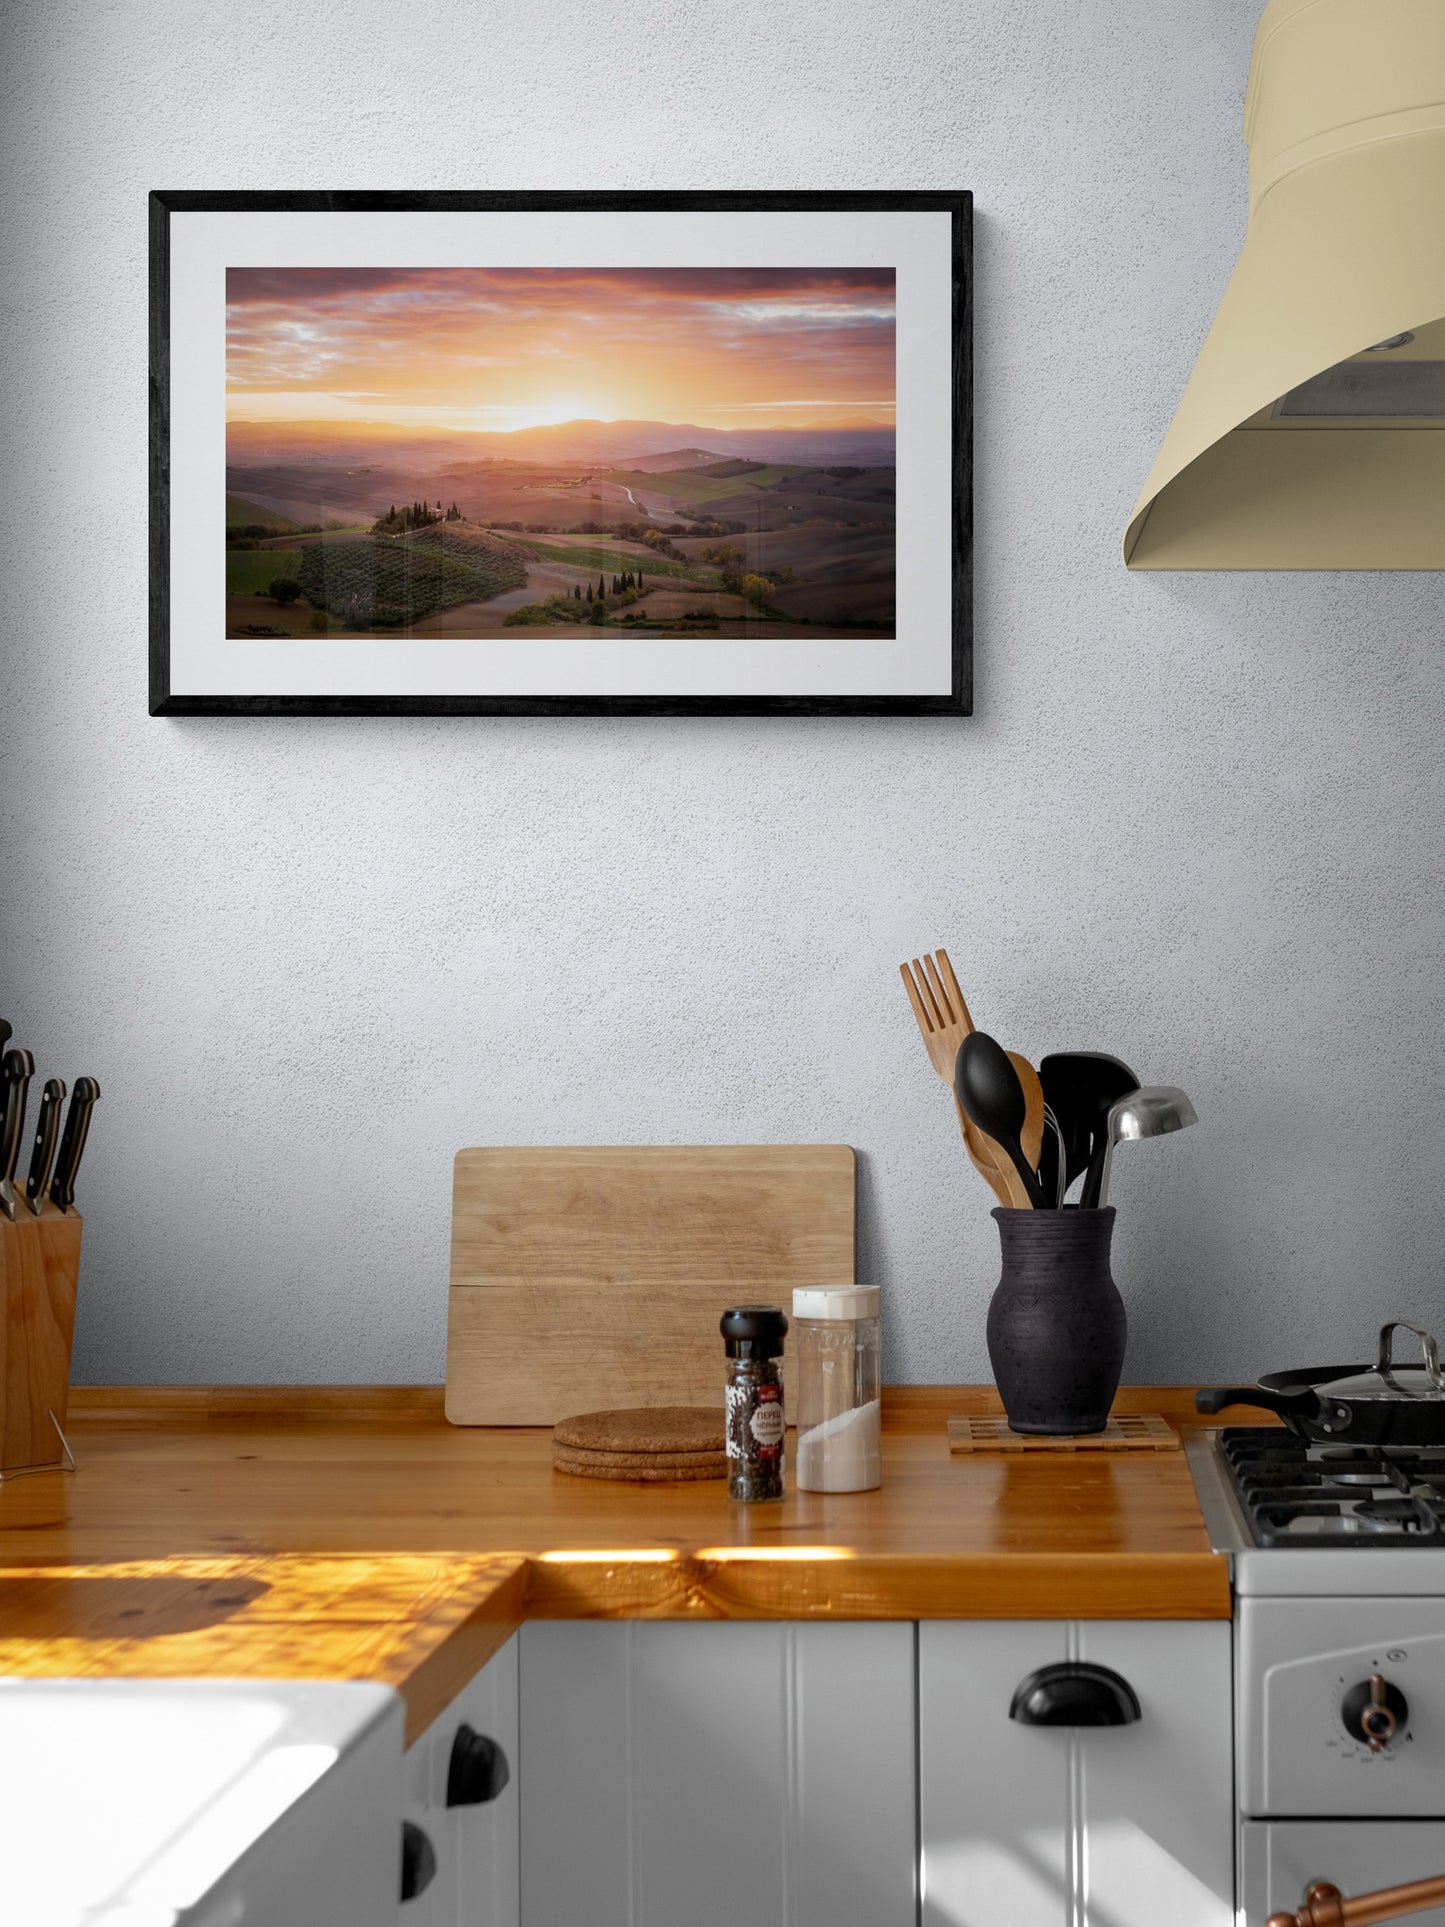 Image Title: Morning Glory Photographer: Marcus Danz Location: Val D'orcia, Italy Image description: The rolling hills of Tuscany and Podere Belvedere are caressed by the soft light of the morning sky. High quality Fine Art print up to 36 inch / around 90 centimeters on Hahnemühle paper available. Medium variant in kitchen.